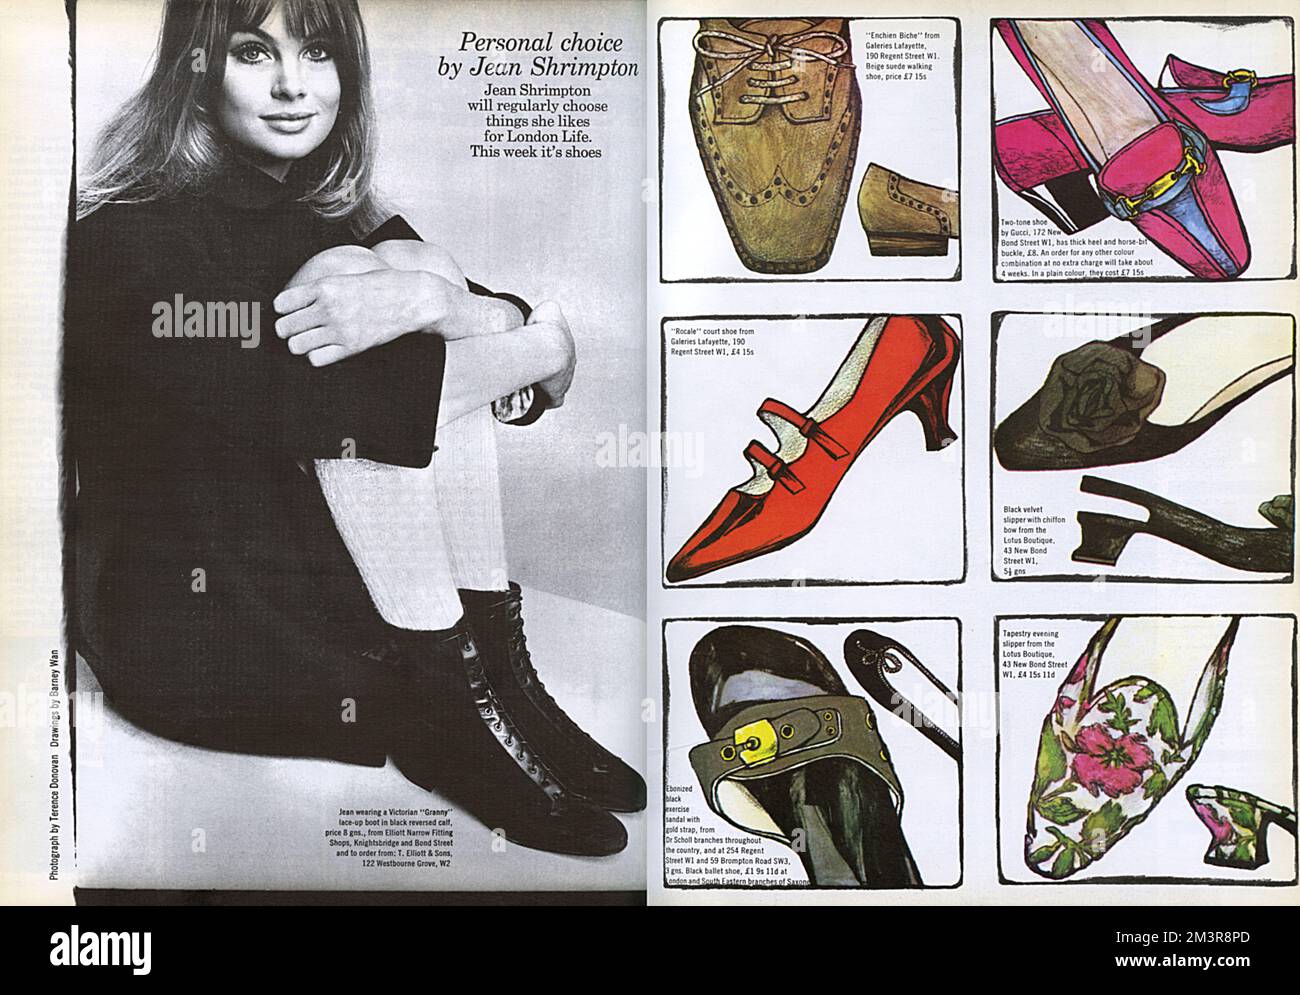 Spread from the short-lived but impossibly cool magazine, London Life, with a column by sixties supermodel Jean Shrimpton who regularly wrote about the clothes she liked.  This week, for the first issue, shoes including some Gucci two tone pumps (top right) and some Scholl sandals drawn by Barney Wan.  Seems Jean has just had to do a bit of shopping and not much writing!    1965 Stock Photo